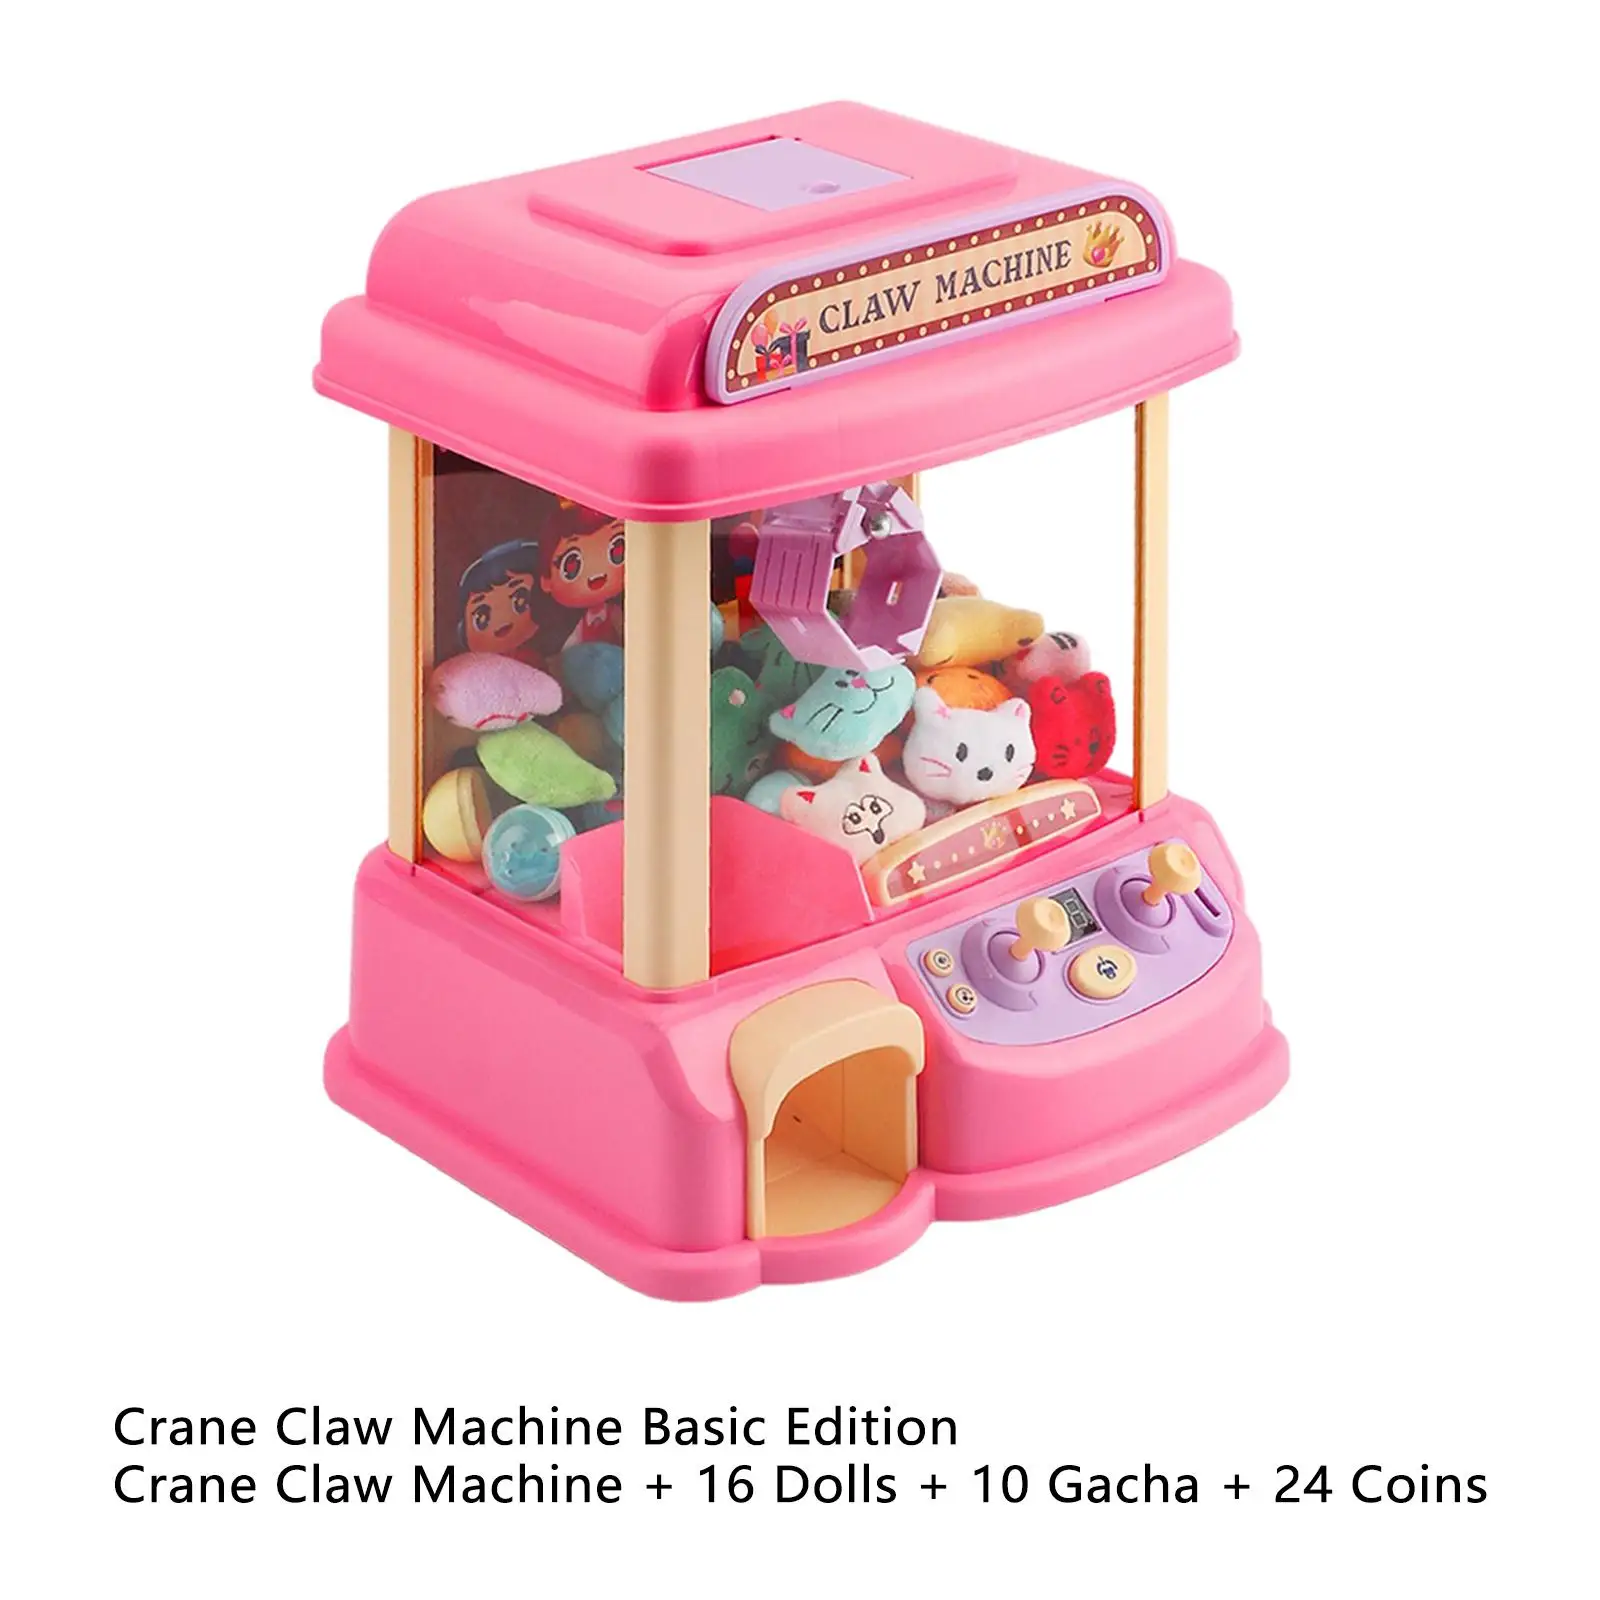  Machine, with Music and Lighting , for  Birthday Gifts Children